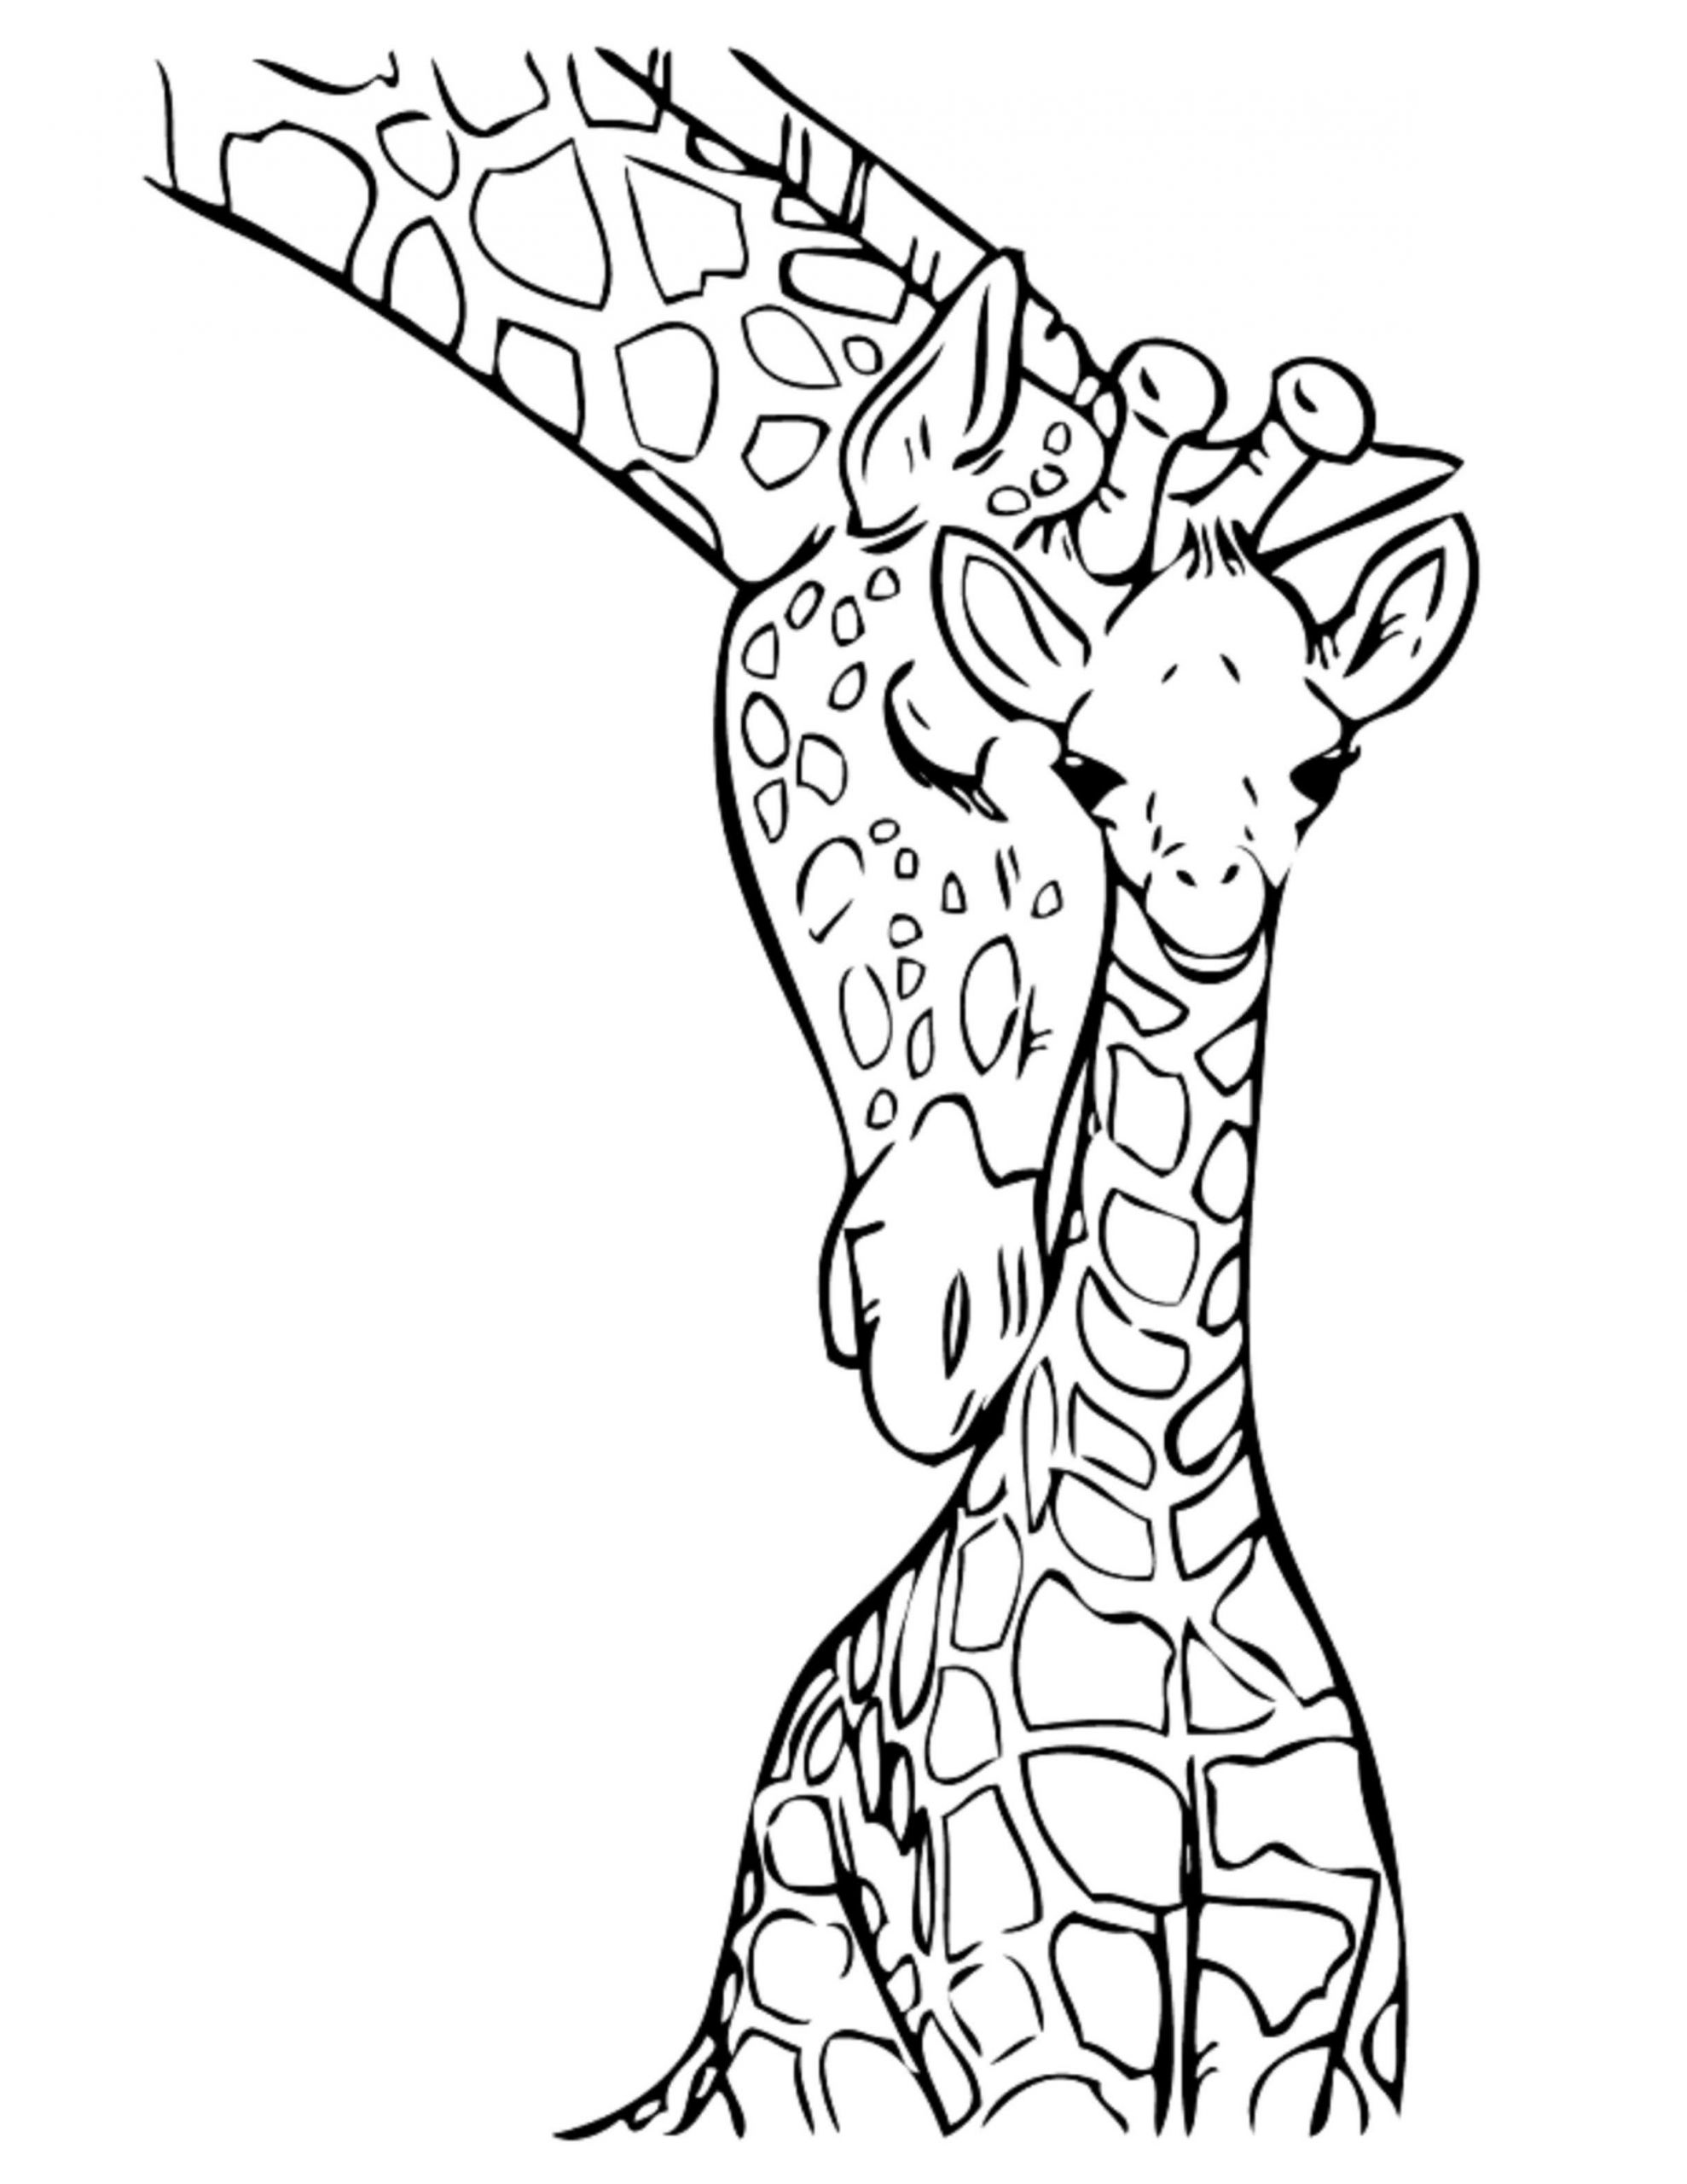 Baby Giraffe Coloring Page
 Jungle Coloring Pages Best Coloring Pages For Kids